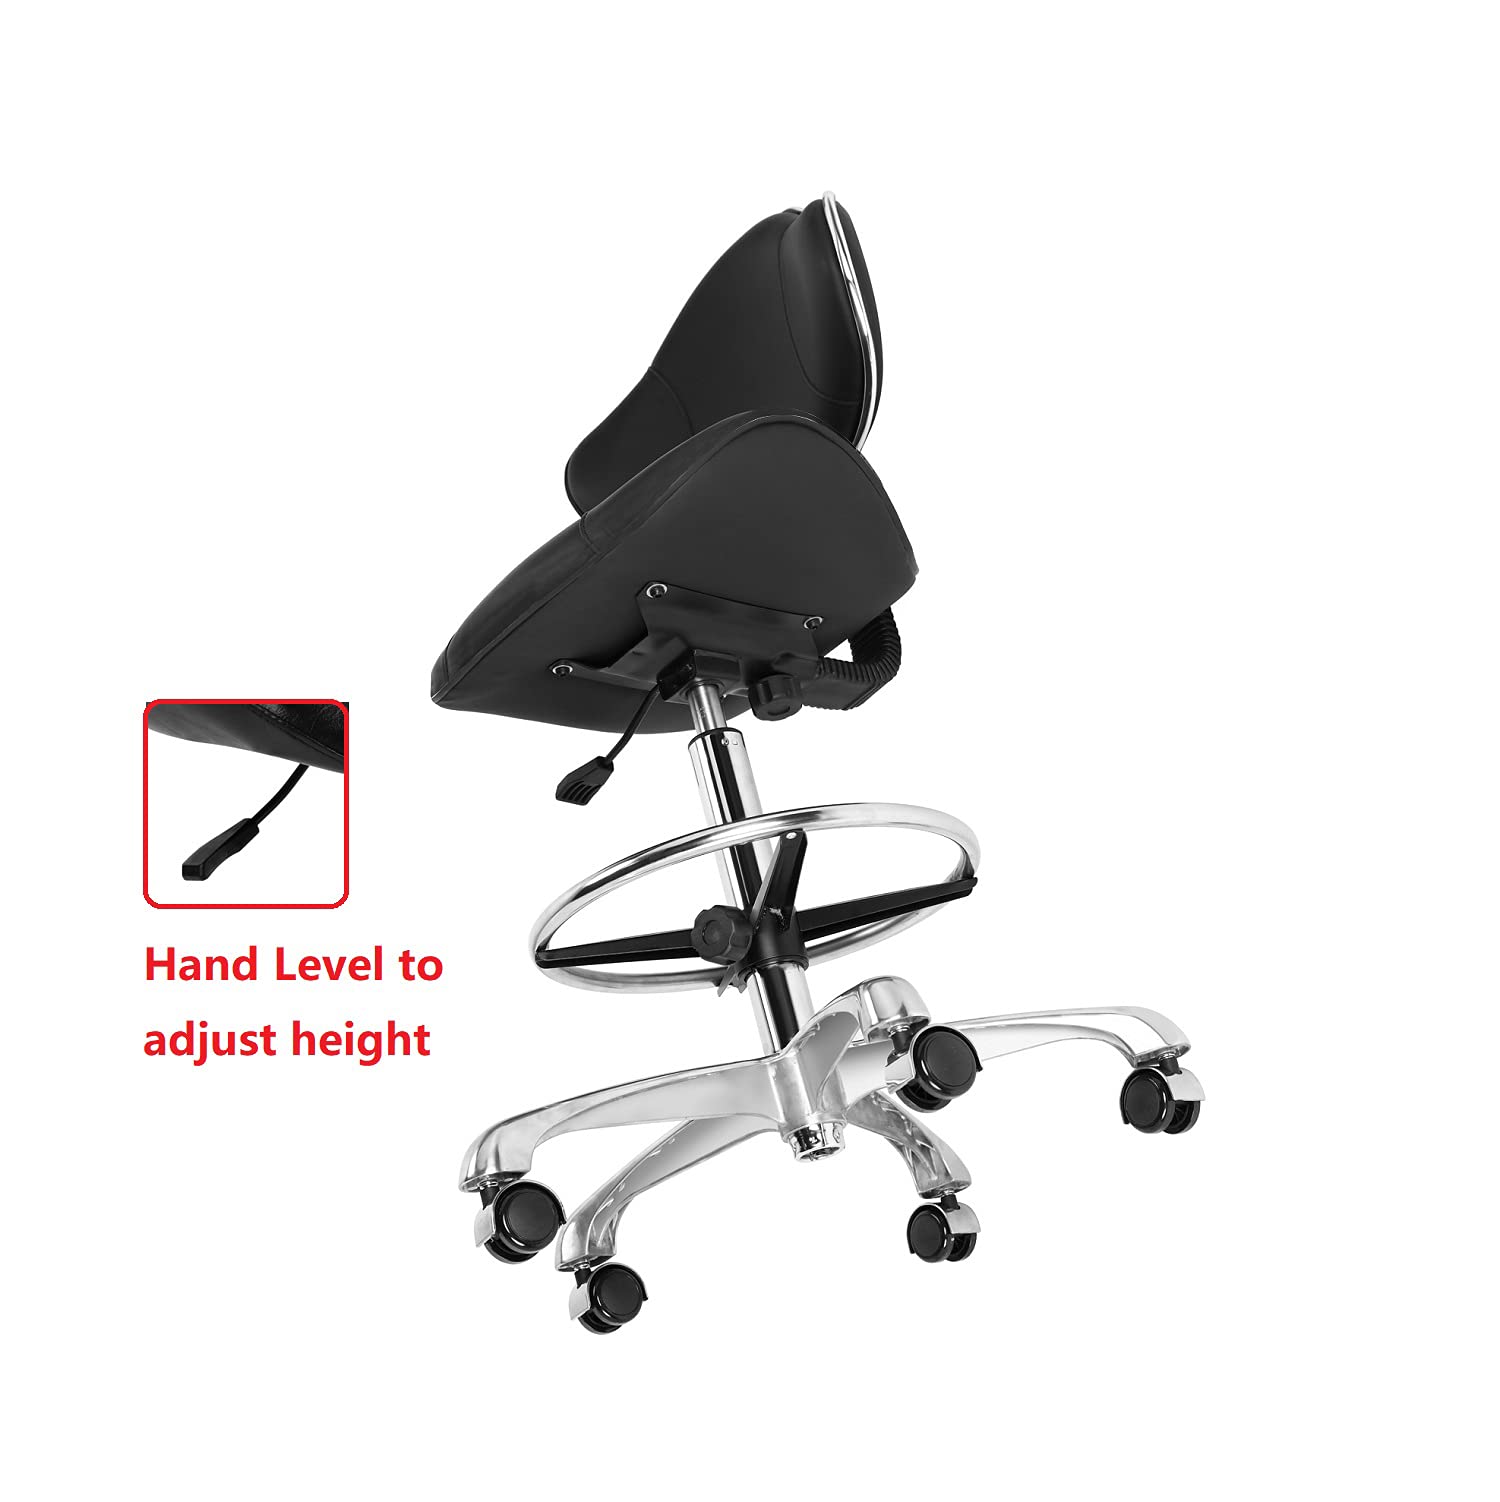 Kaleurrier Ergonomic Drafting Chair with Back Support,Multi-Functional Height Adjustable Swivel Rolling Stool,Multi-Purpose Home Office Desk Chair (White)